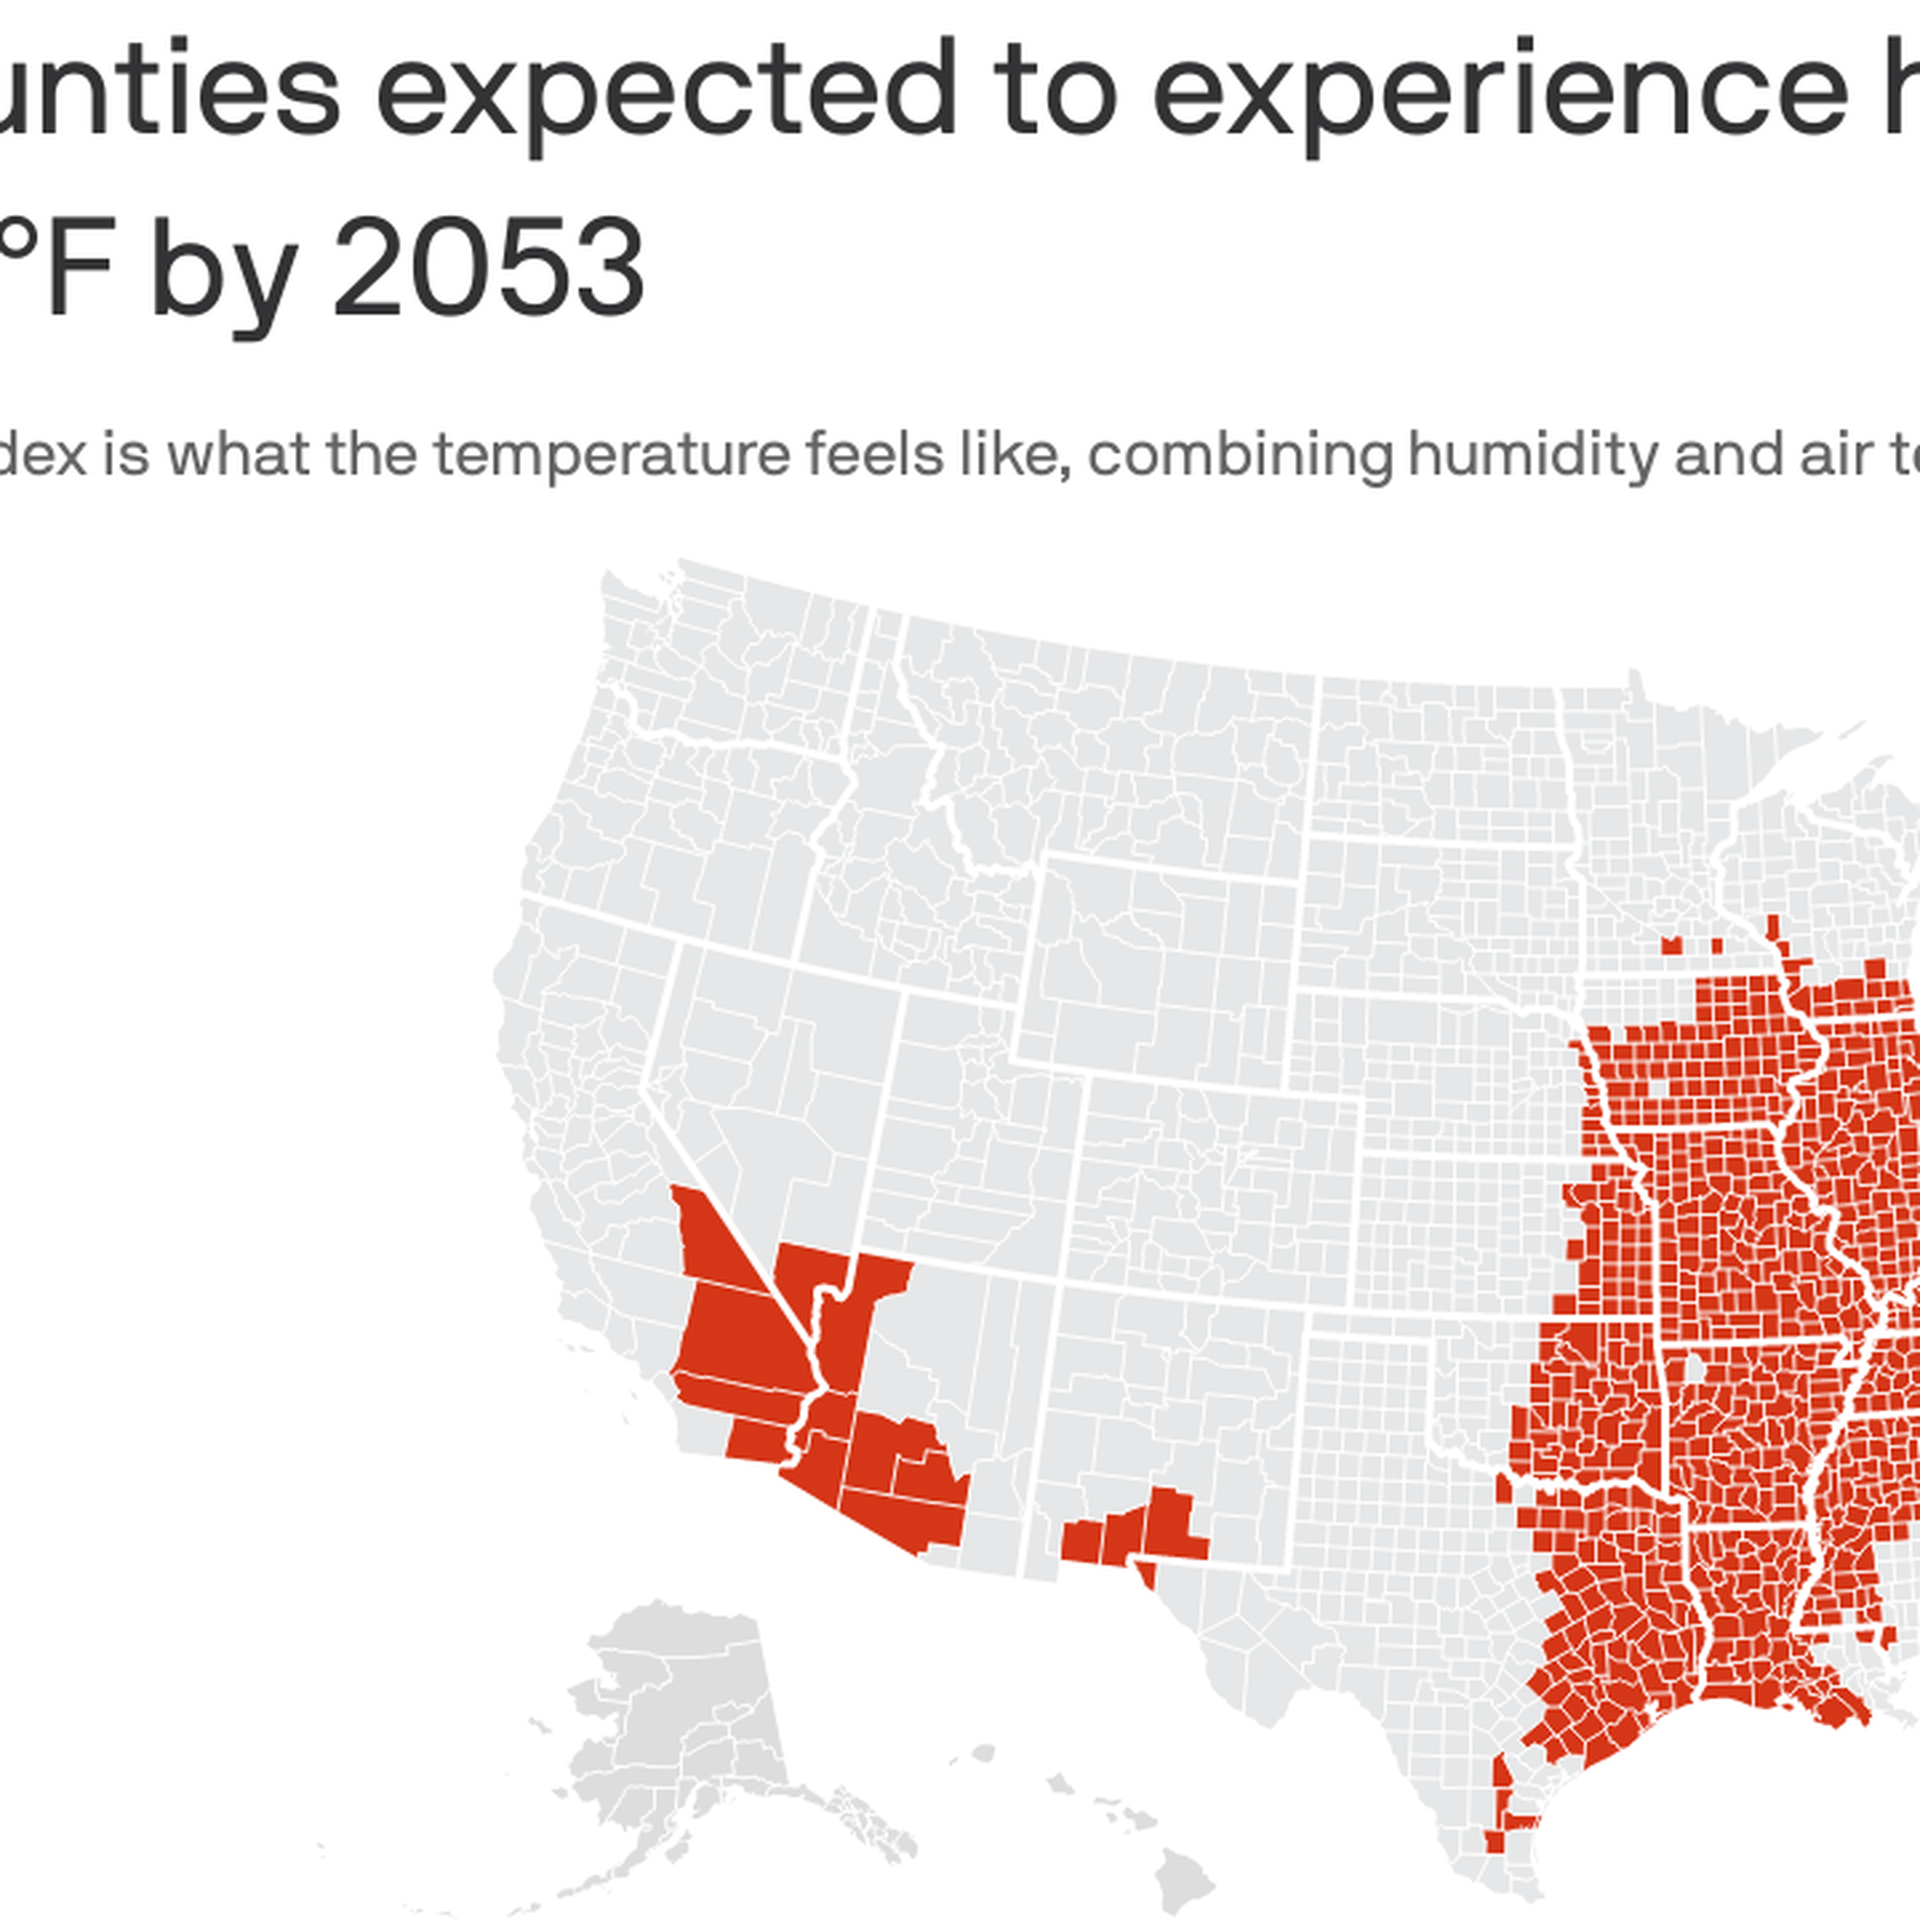 A map showing the U.S. counties that will experience 125-degree heat by 2053.